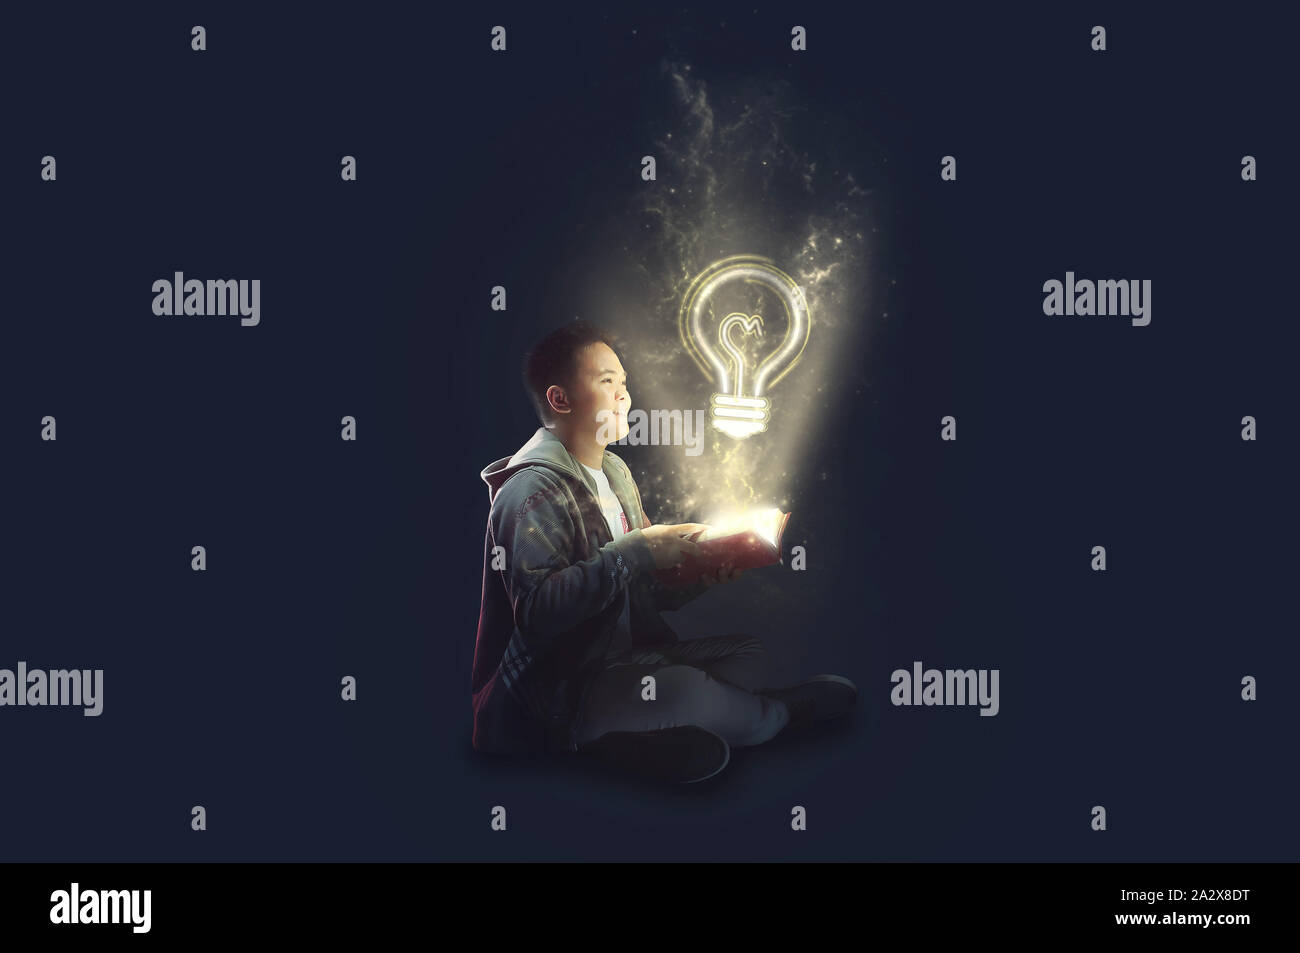 A school boy wearing a jacket holding and reading a magical book with mystical light coming out. Ideas from reading. Depicting education. Stock Photo